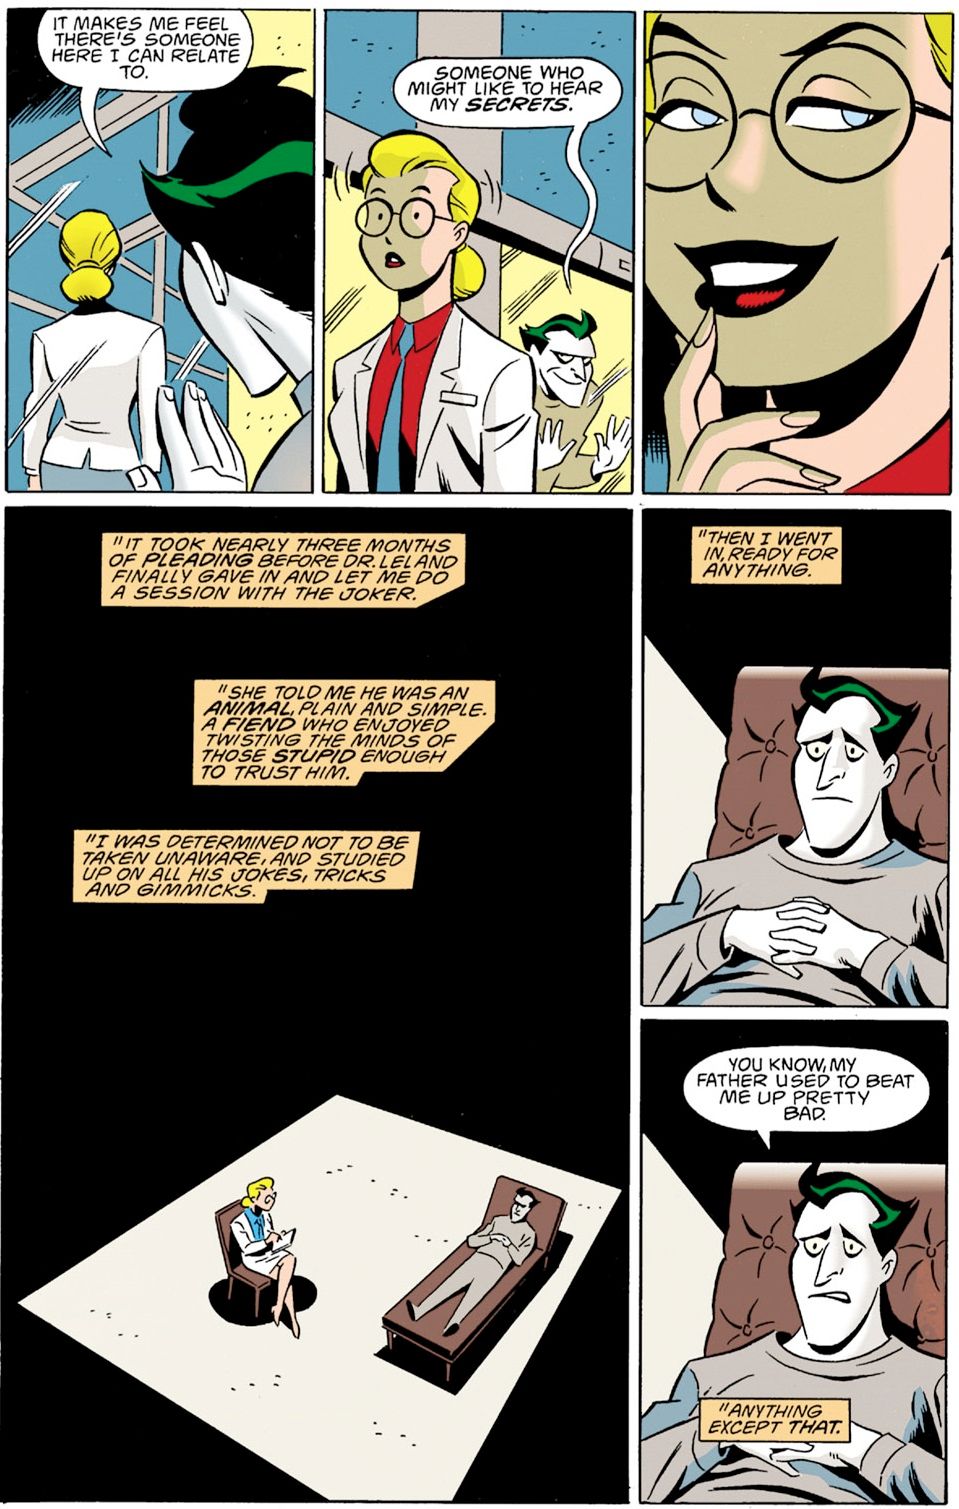 The Joker seduces Harley through therapy